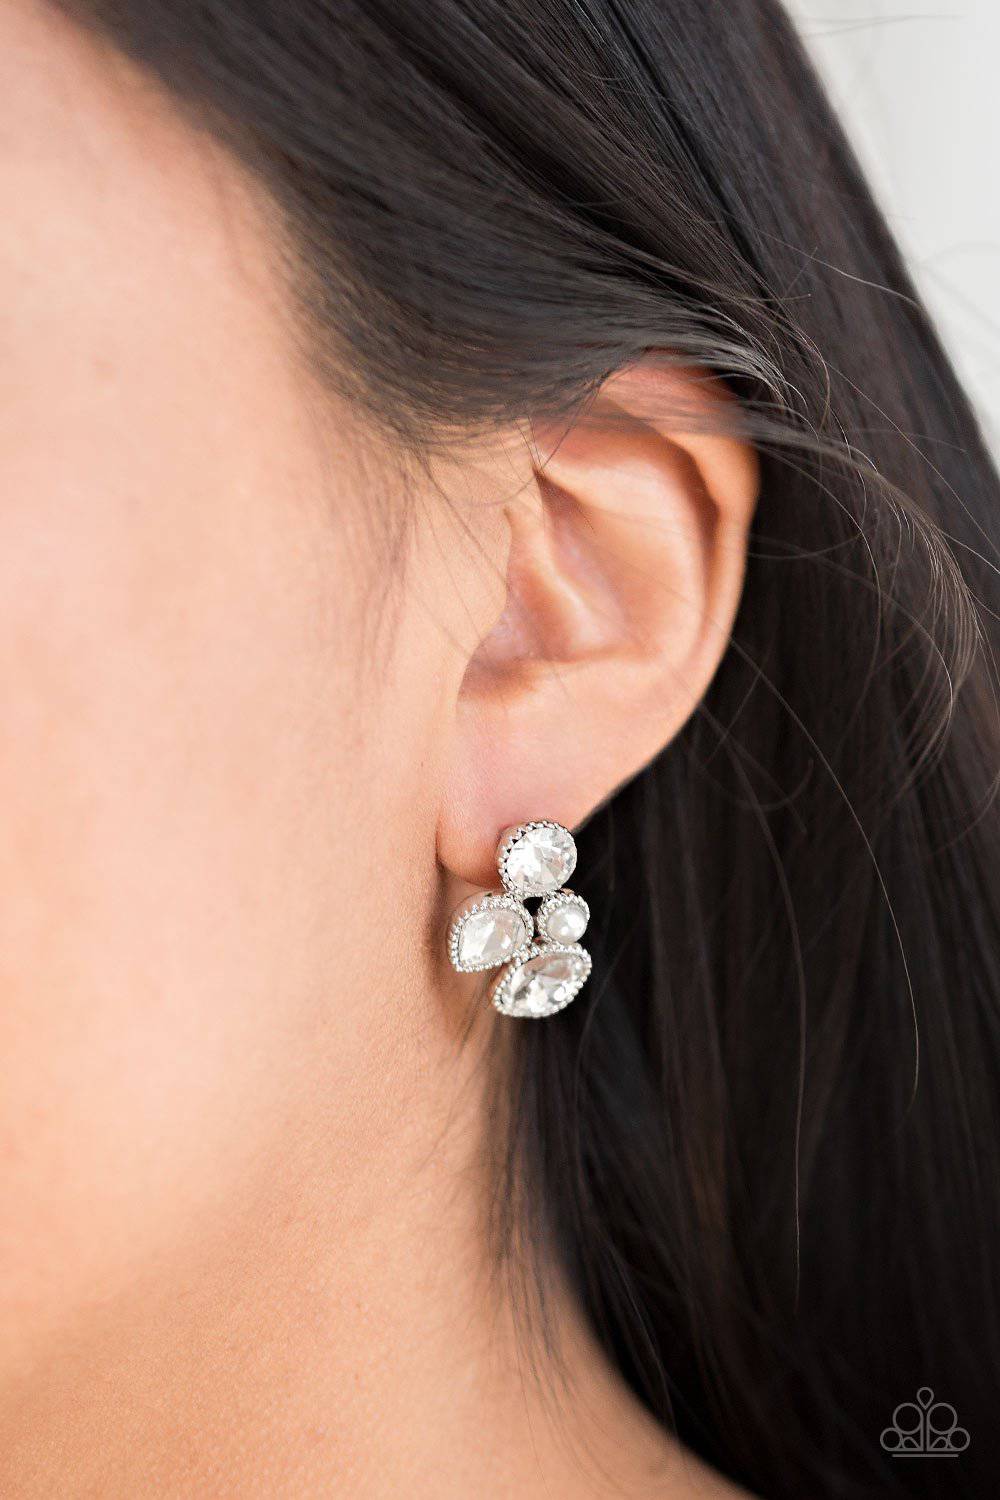 D124 - Super Superstar White Earrings by Paparazzi Accessories on Fancy5Fashion.com